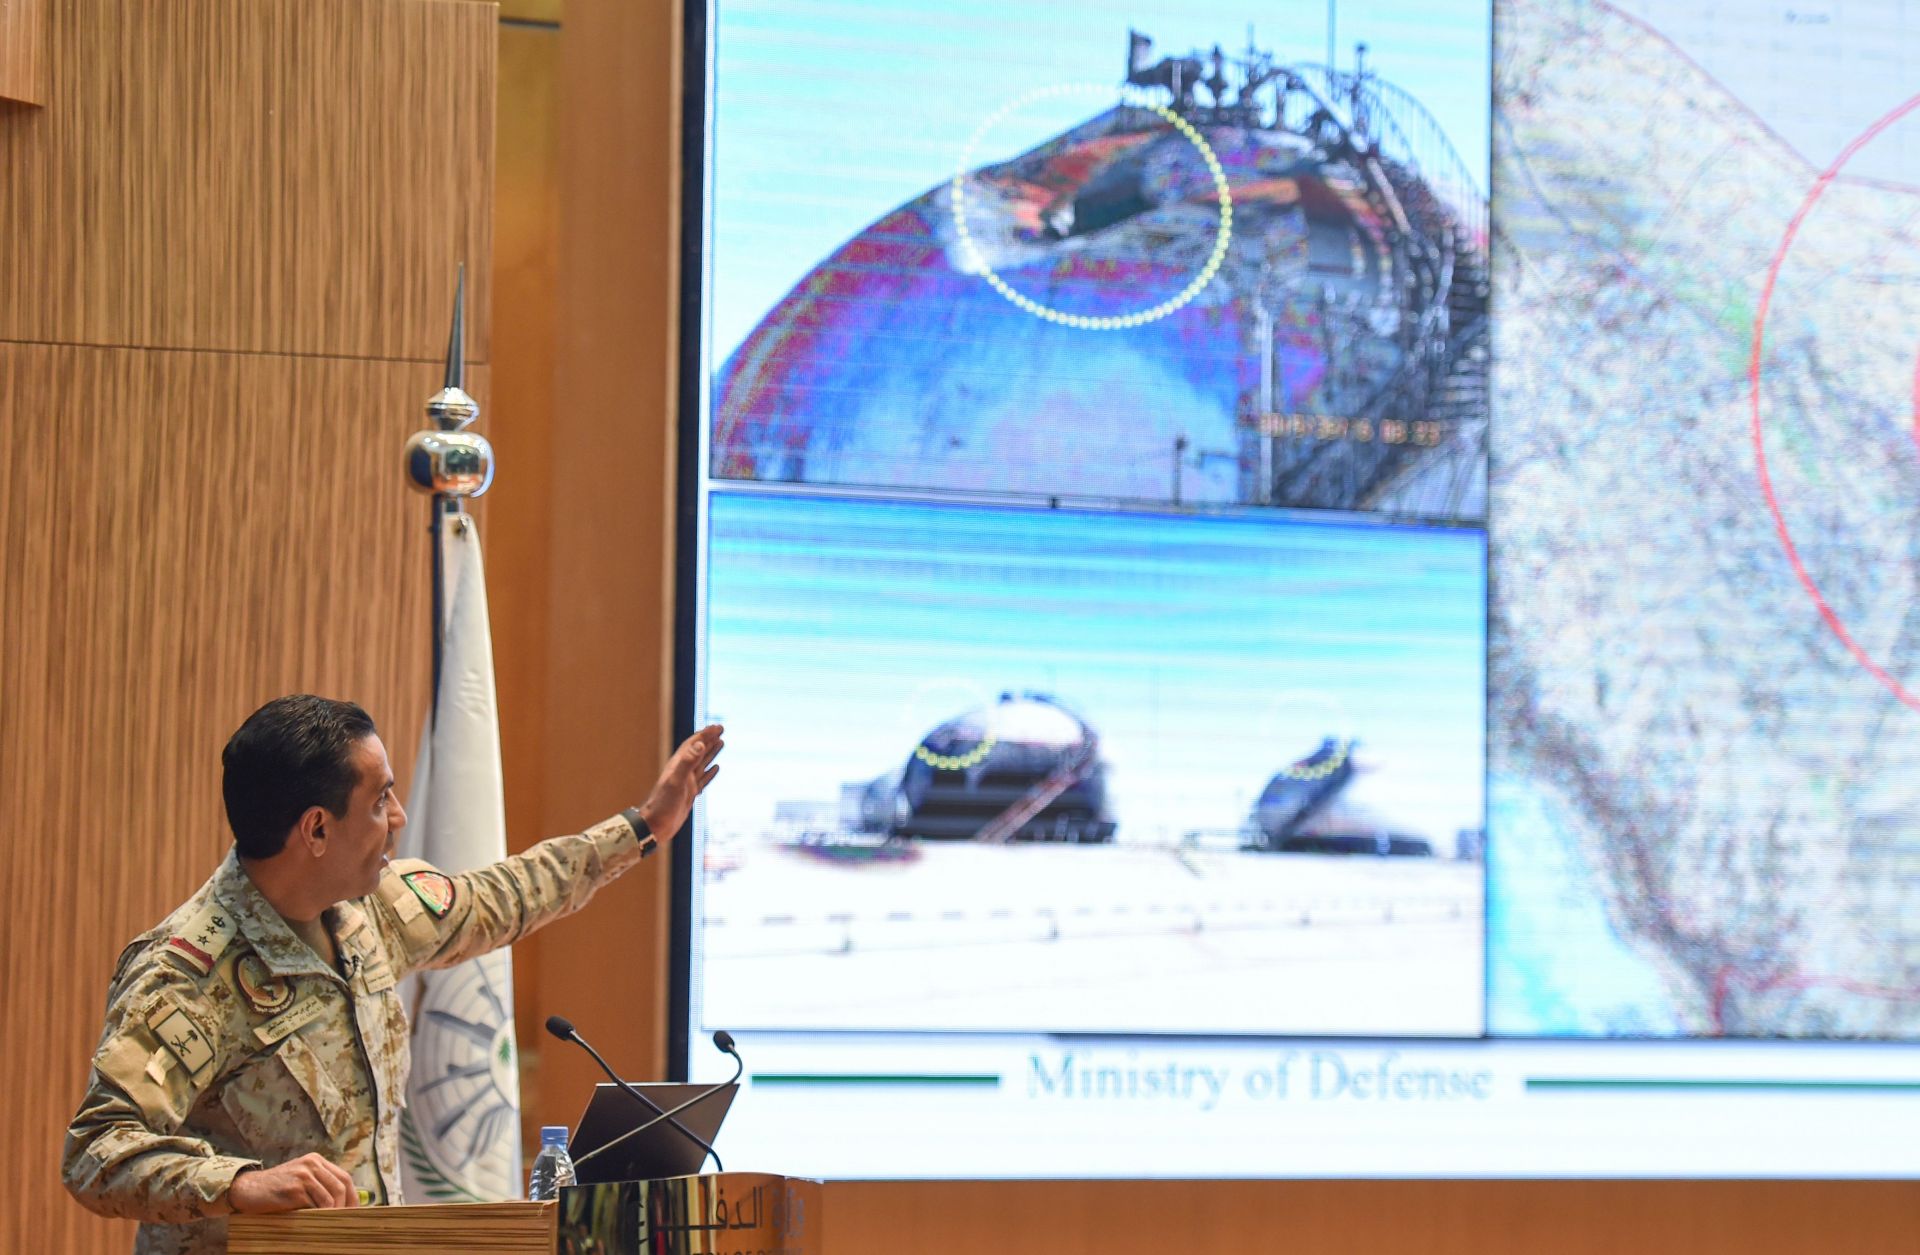 A Saudi Defense Ministry official speaks in Riyadh on Sept. 18, 2019, following Sept. 14 attacks on Saudi Aramco facilities in Abqaiq and Khurais.